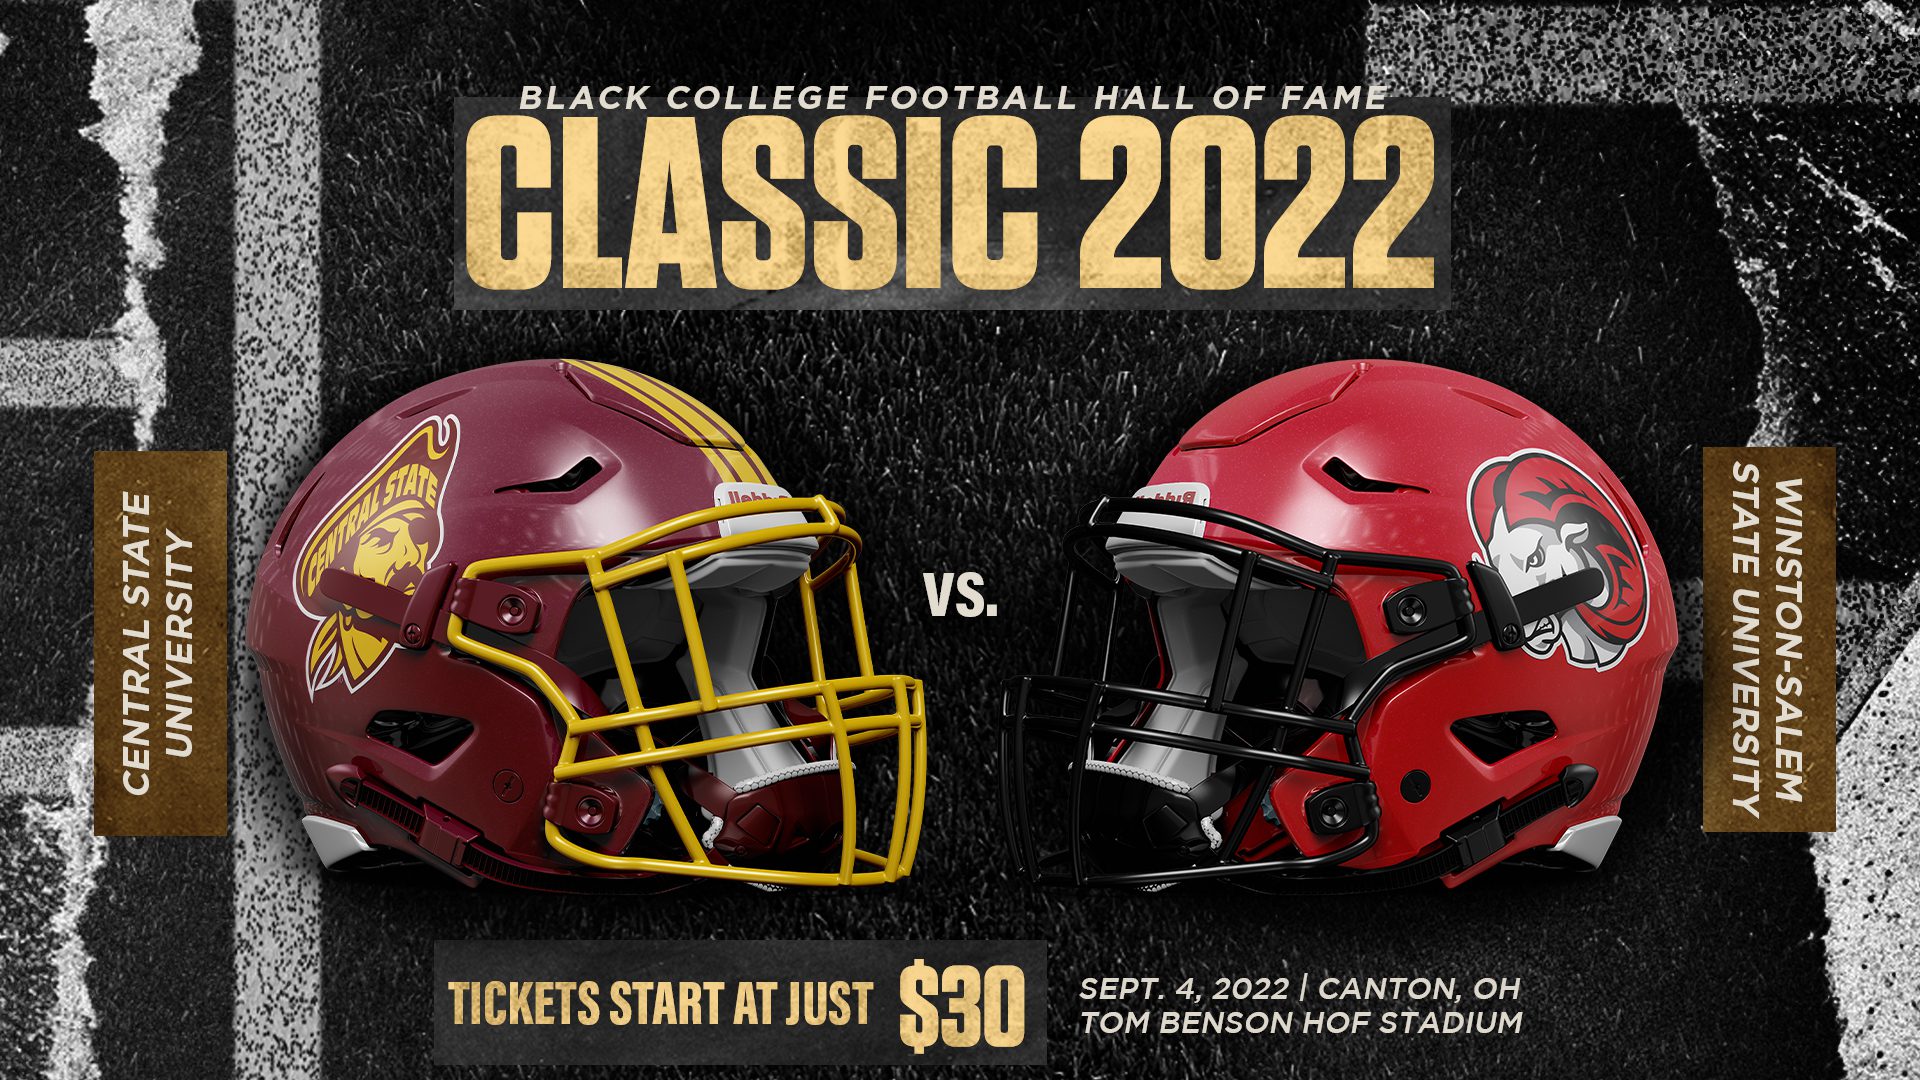 NFL News 2022 Black College Football Hall of Fame Classic Live on NFL